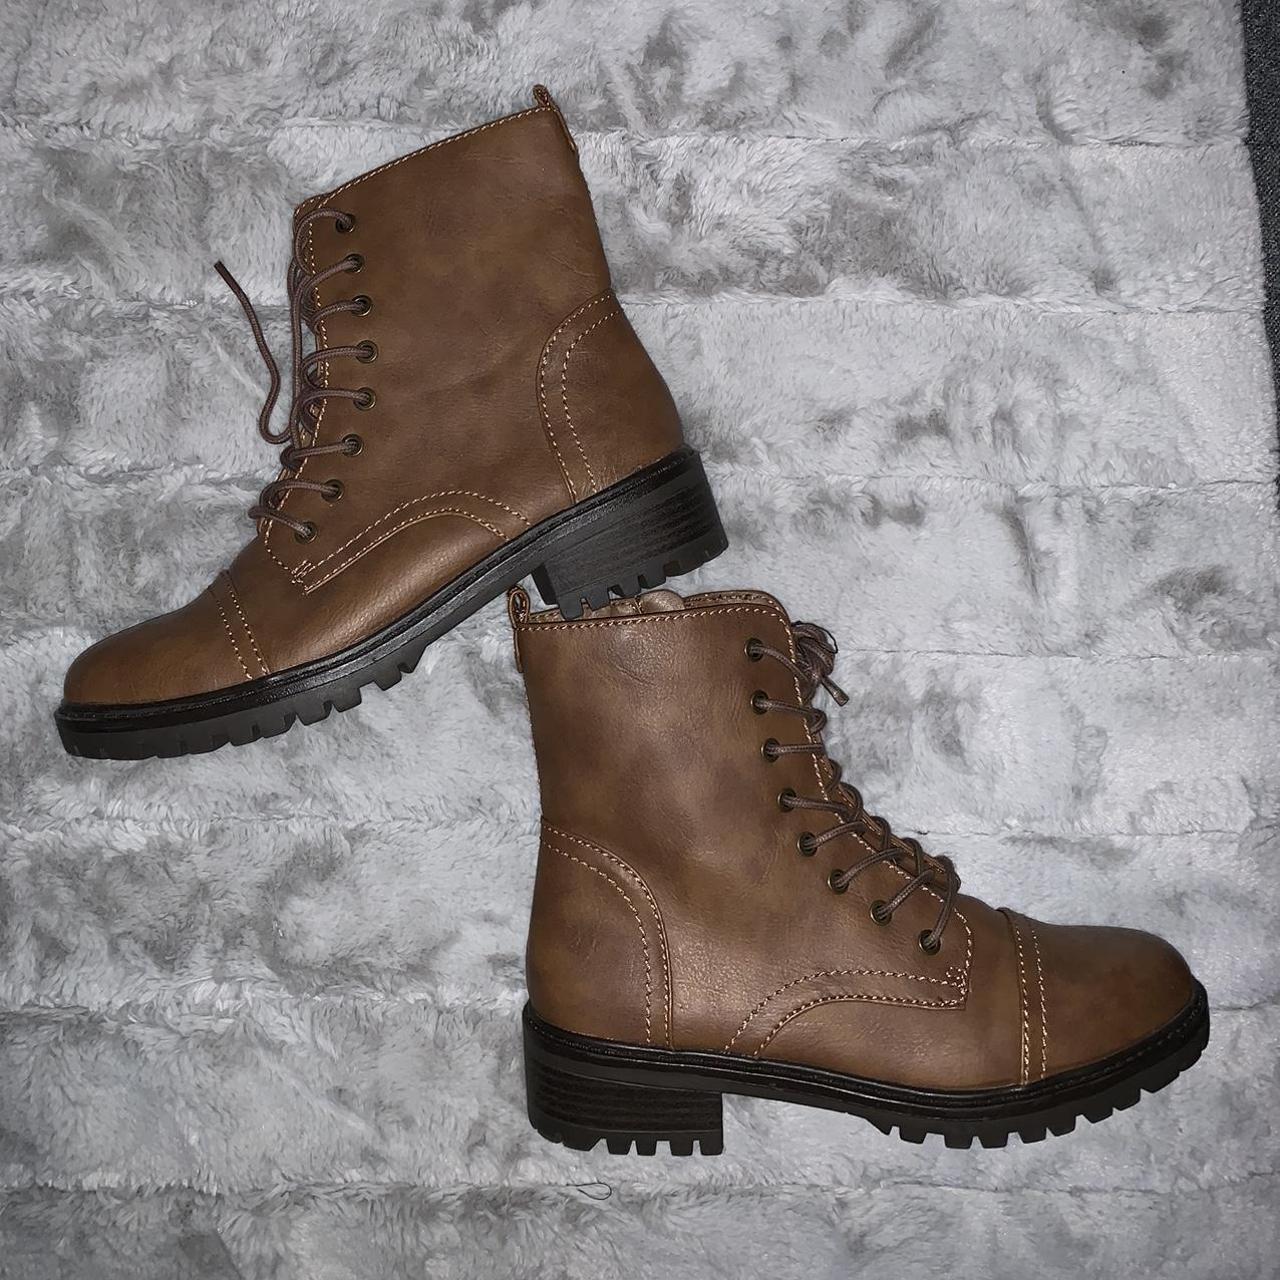 Coffee brown biker boots 🥾 Perfect for styling for... - Depop